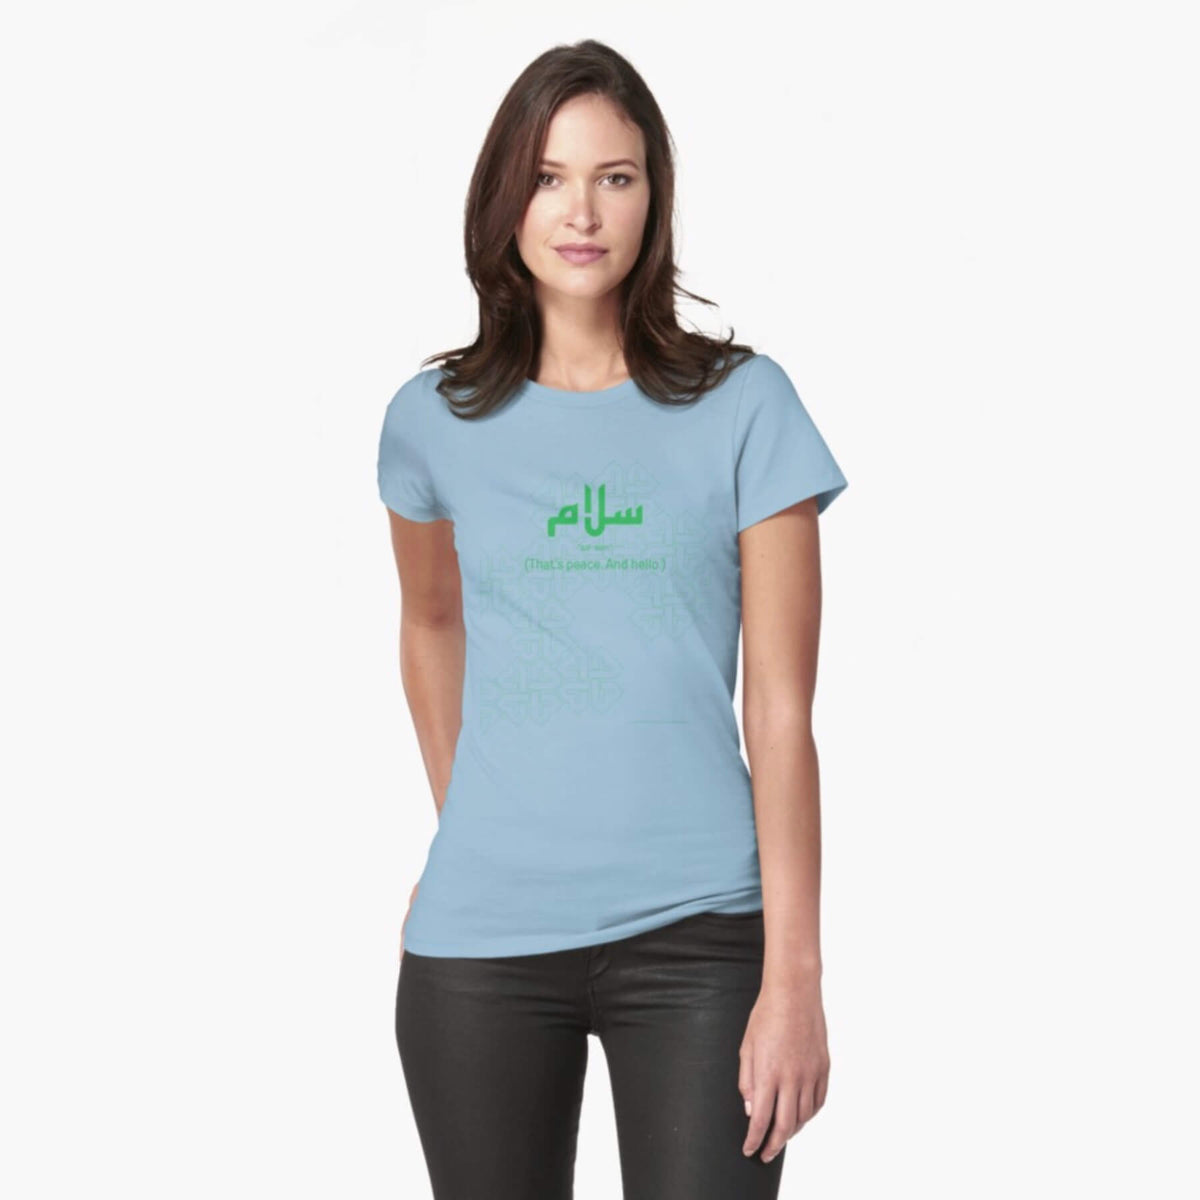 A white female model with hazel eyes and brown shoulder-length hair wears the Haluna Happy Names exclusive &#39;Salaam—Arabic Key Words&#39; design fitted t-shirt in sky blue marle ,and tight black jeans. The word &#39;salaam&#39; is written in green in Arabic with a kufic-style font, and beneath it in English the words &quot;Sal-aam&quot; and beneath that the words &#39;(That means peace. And hello)&#39;. The text is positioned on the tshirt so it falls across the chest of the model against a complementary green background pattern.